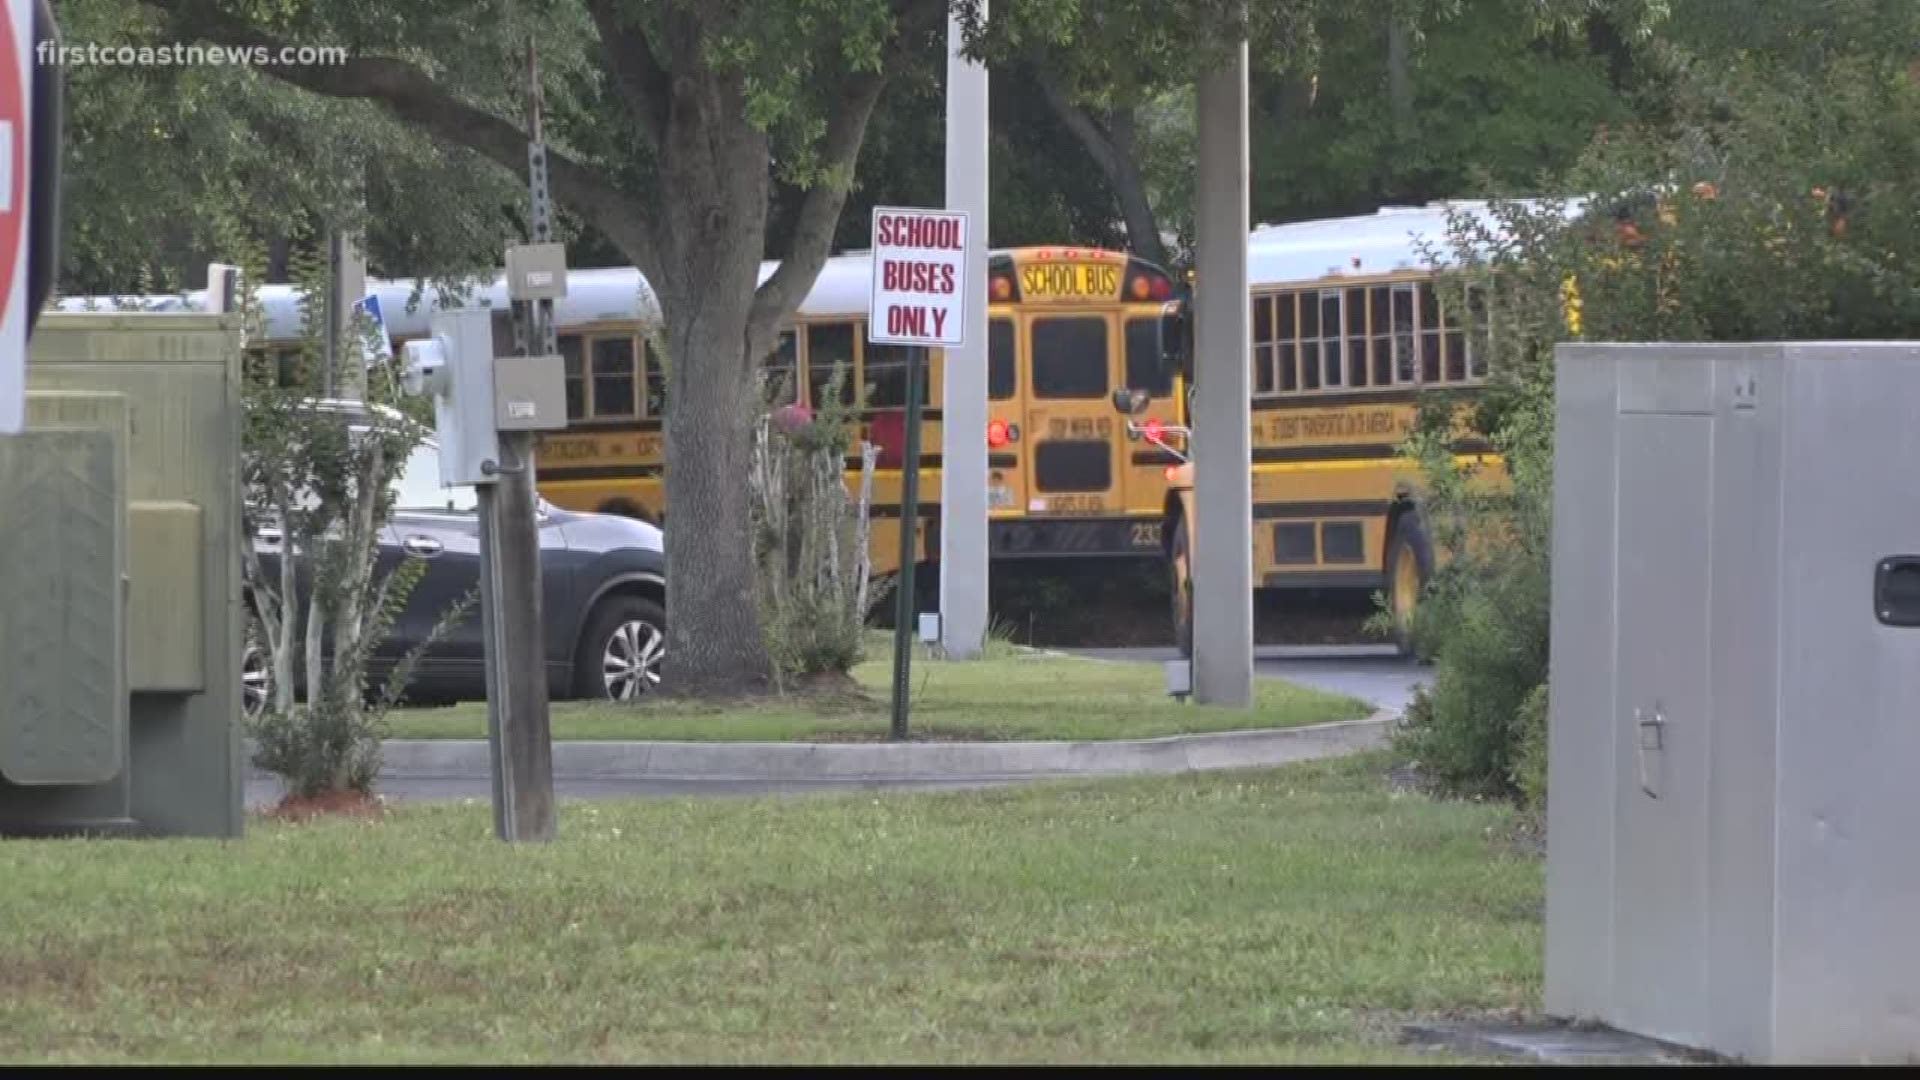 The code yellow lockdown was lifted at Terry Parker High School in the Arlington area on Monday afternoon, according to Duval County Public Schools.